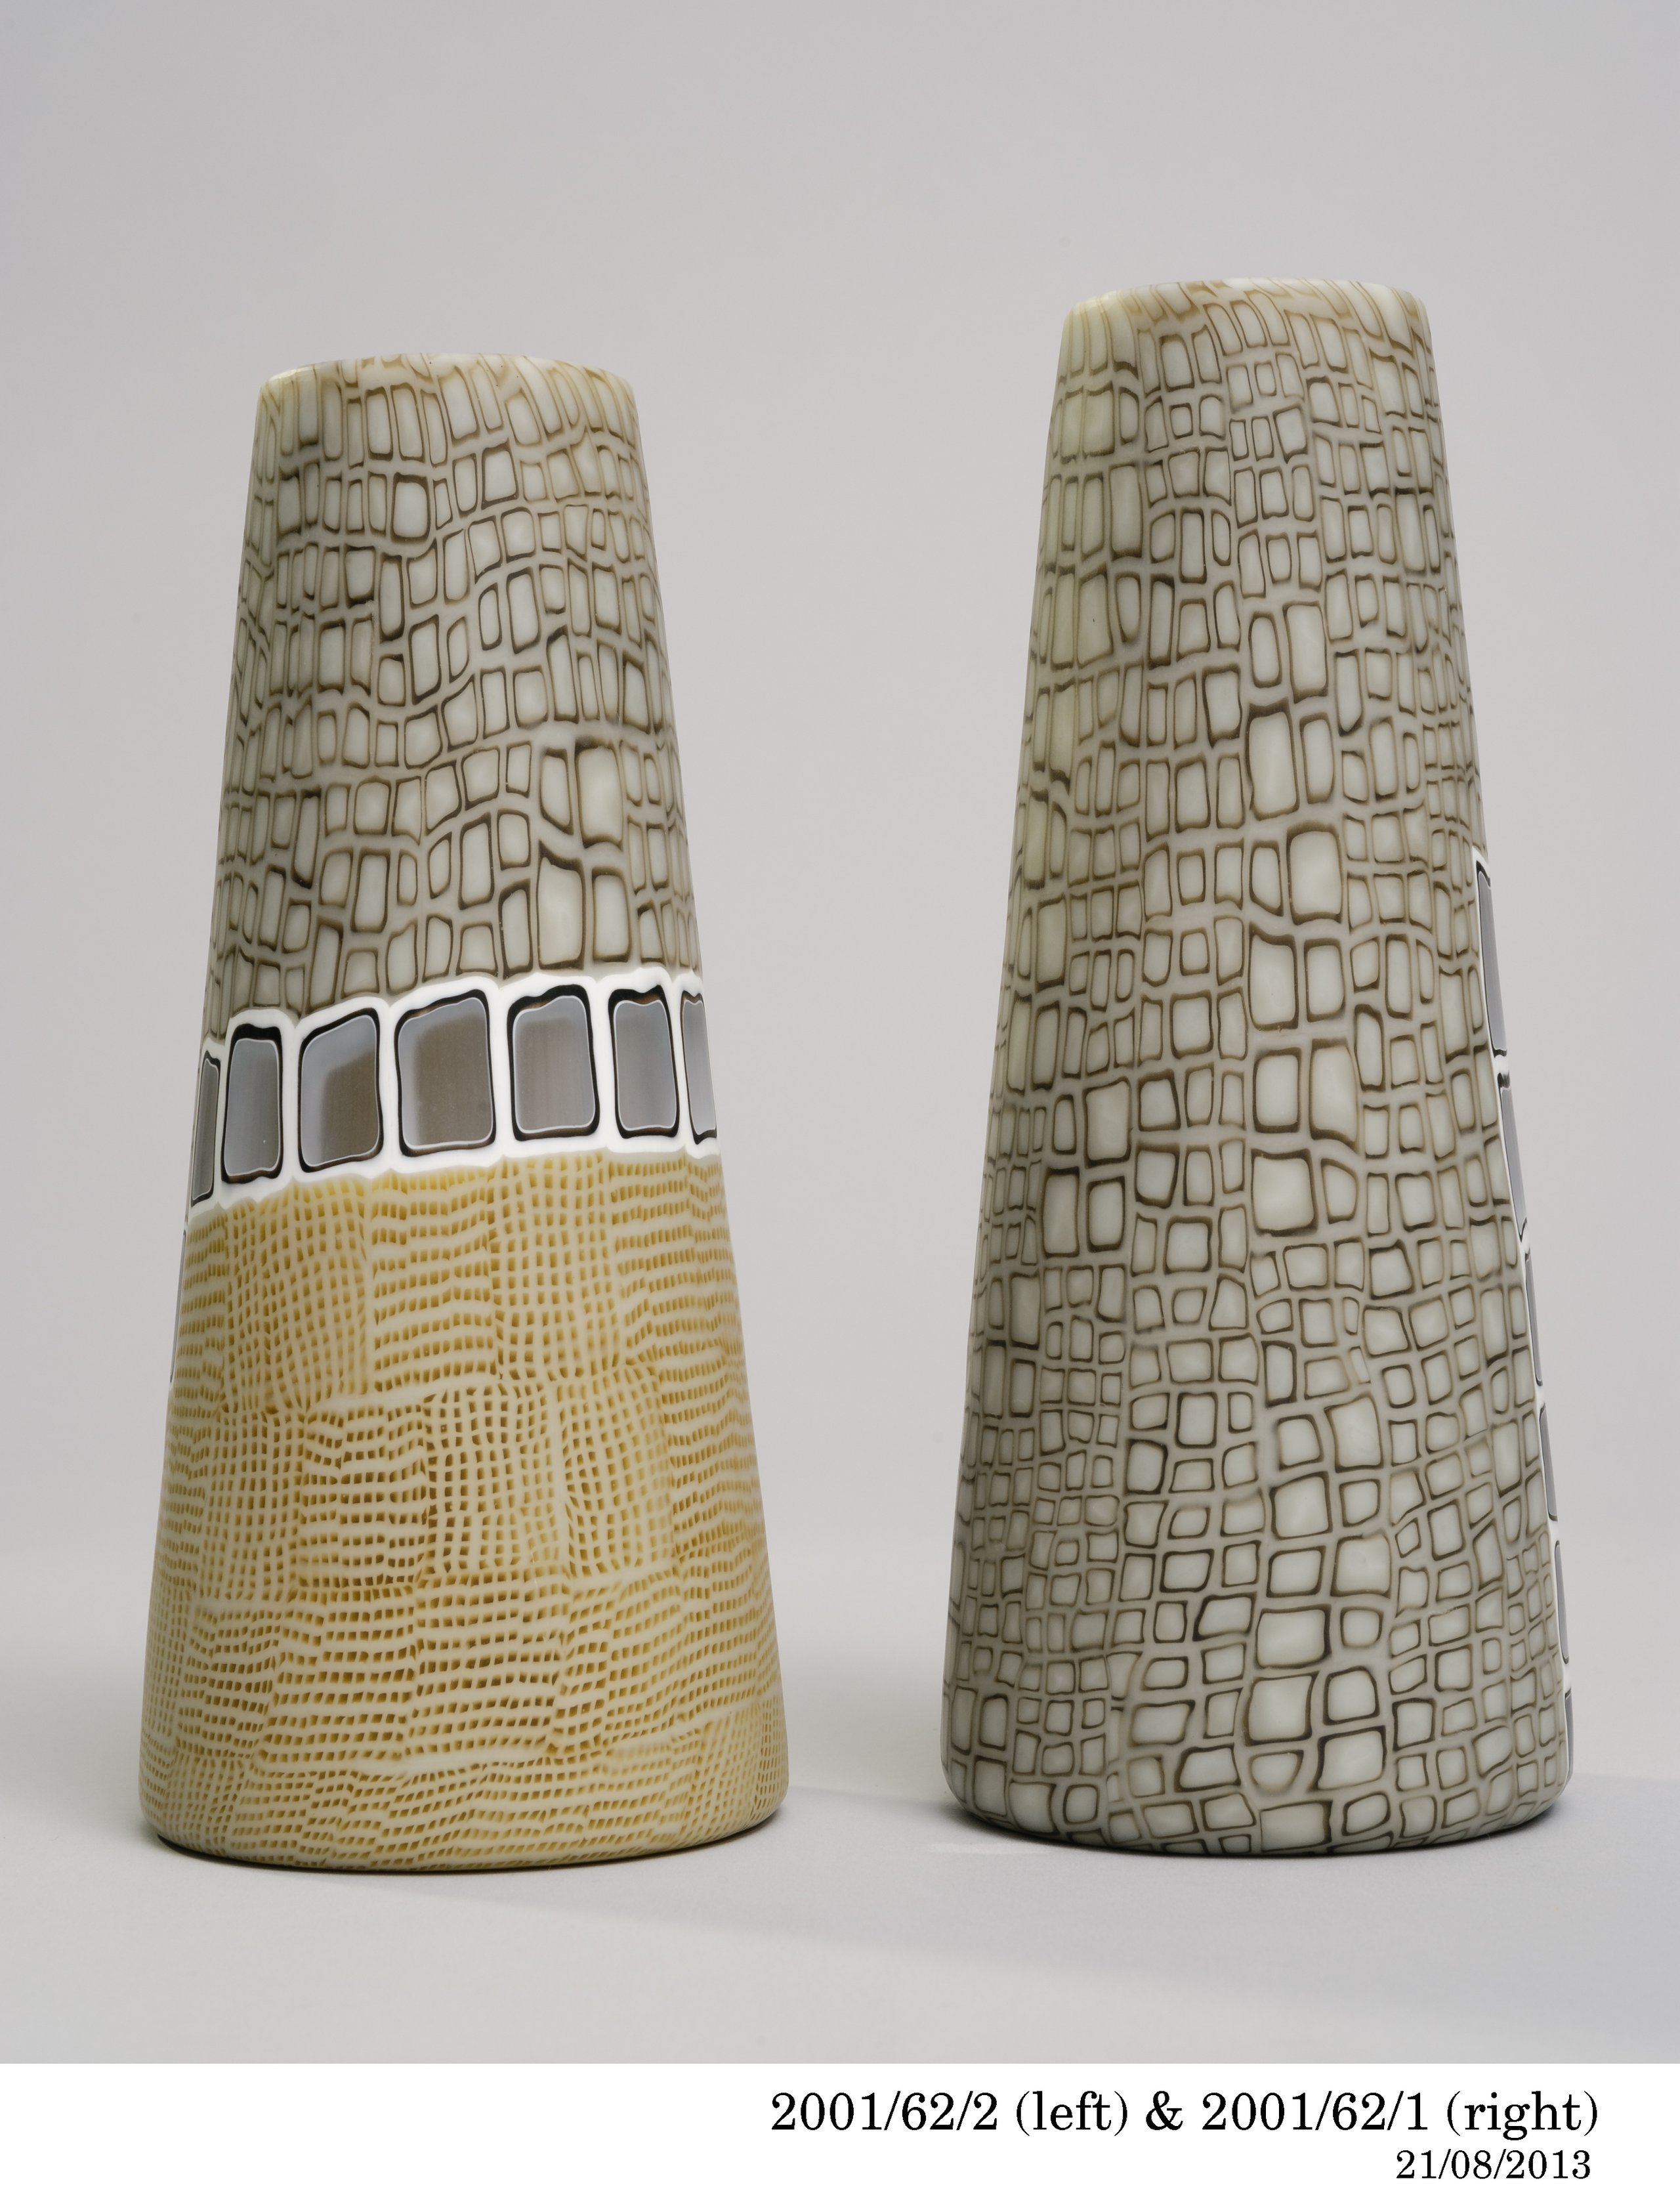 'Cell series' vase by Giles Bettison